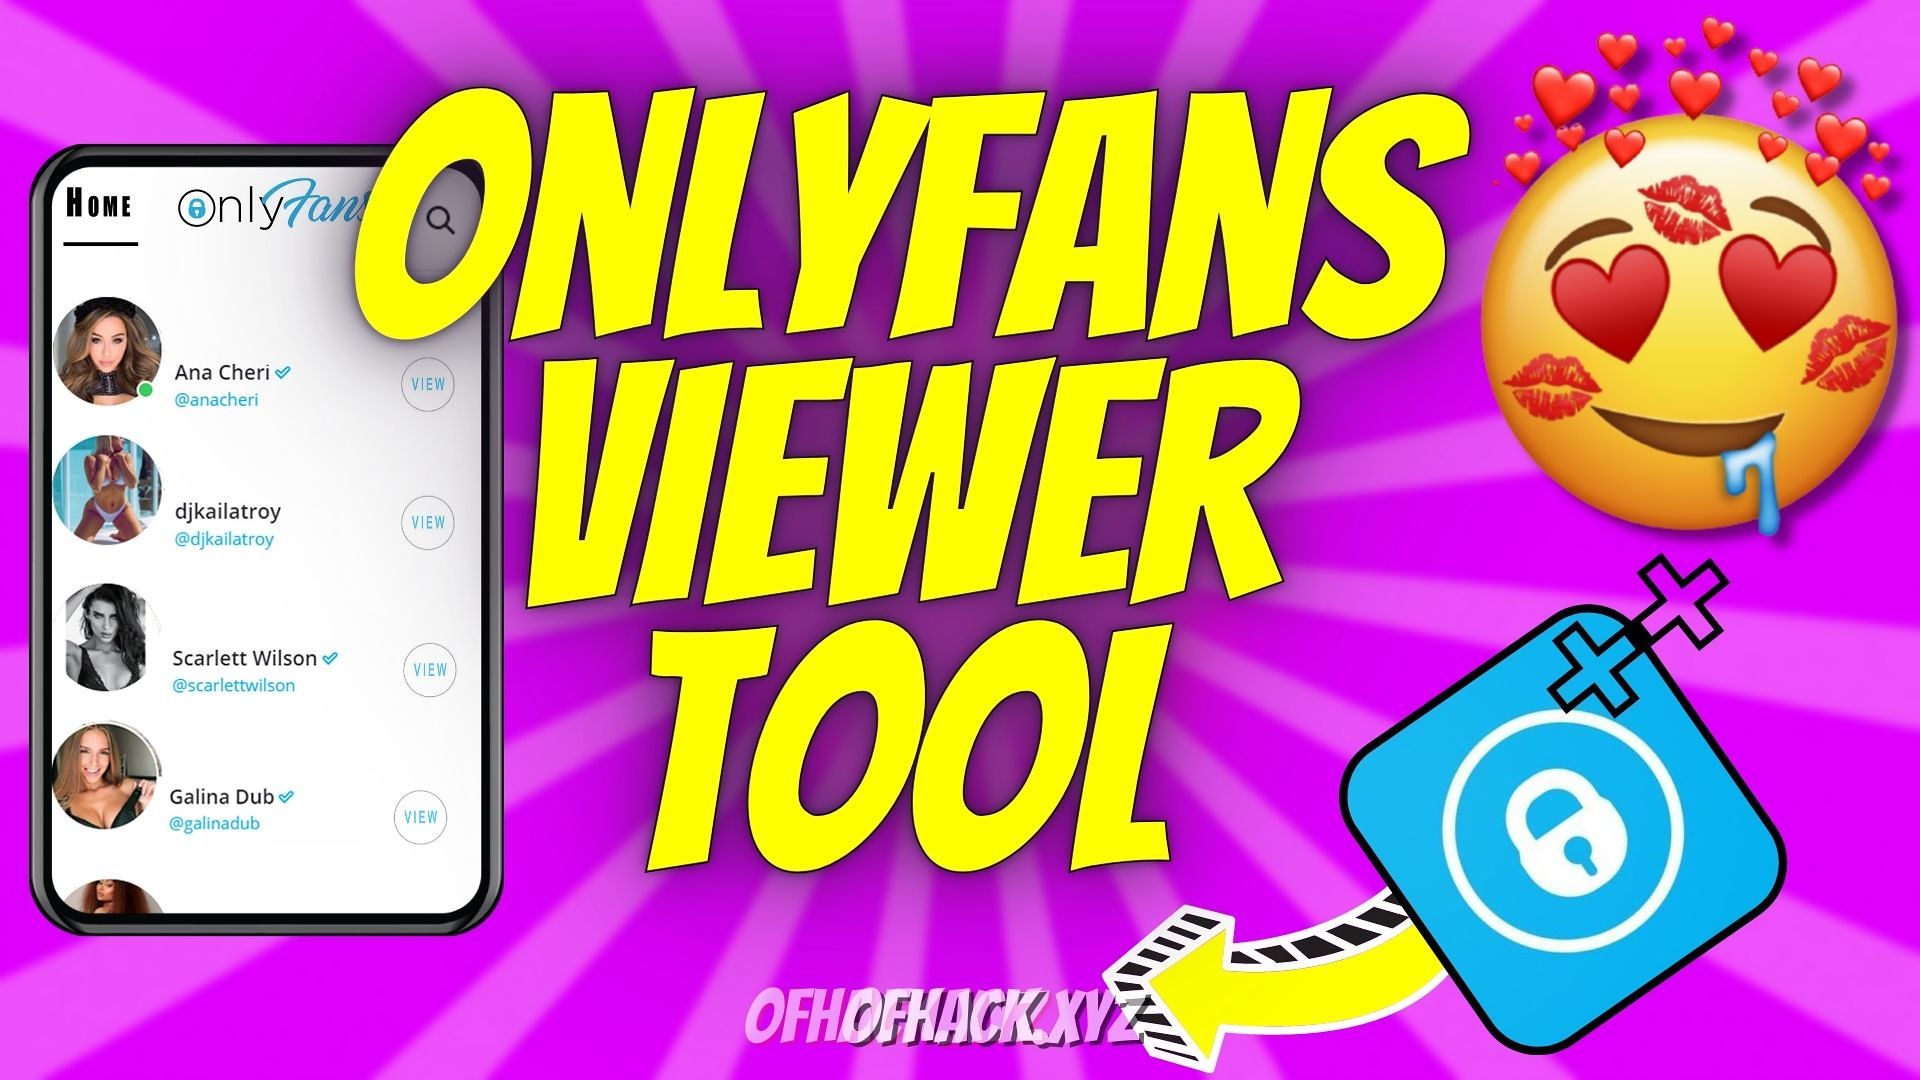 Onlyfans Viewer Tool: